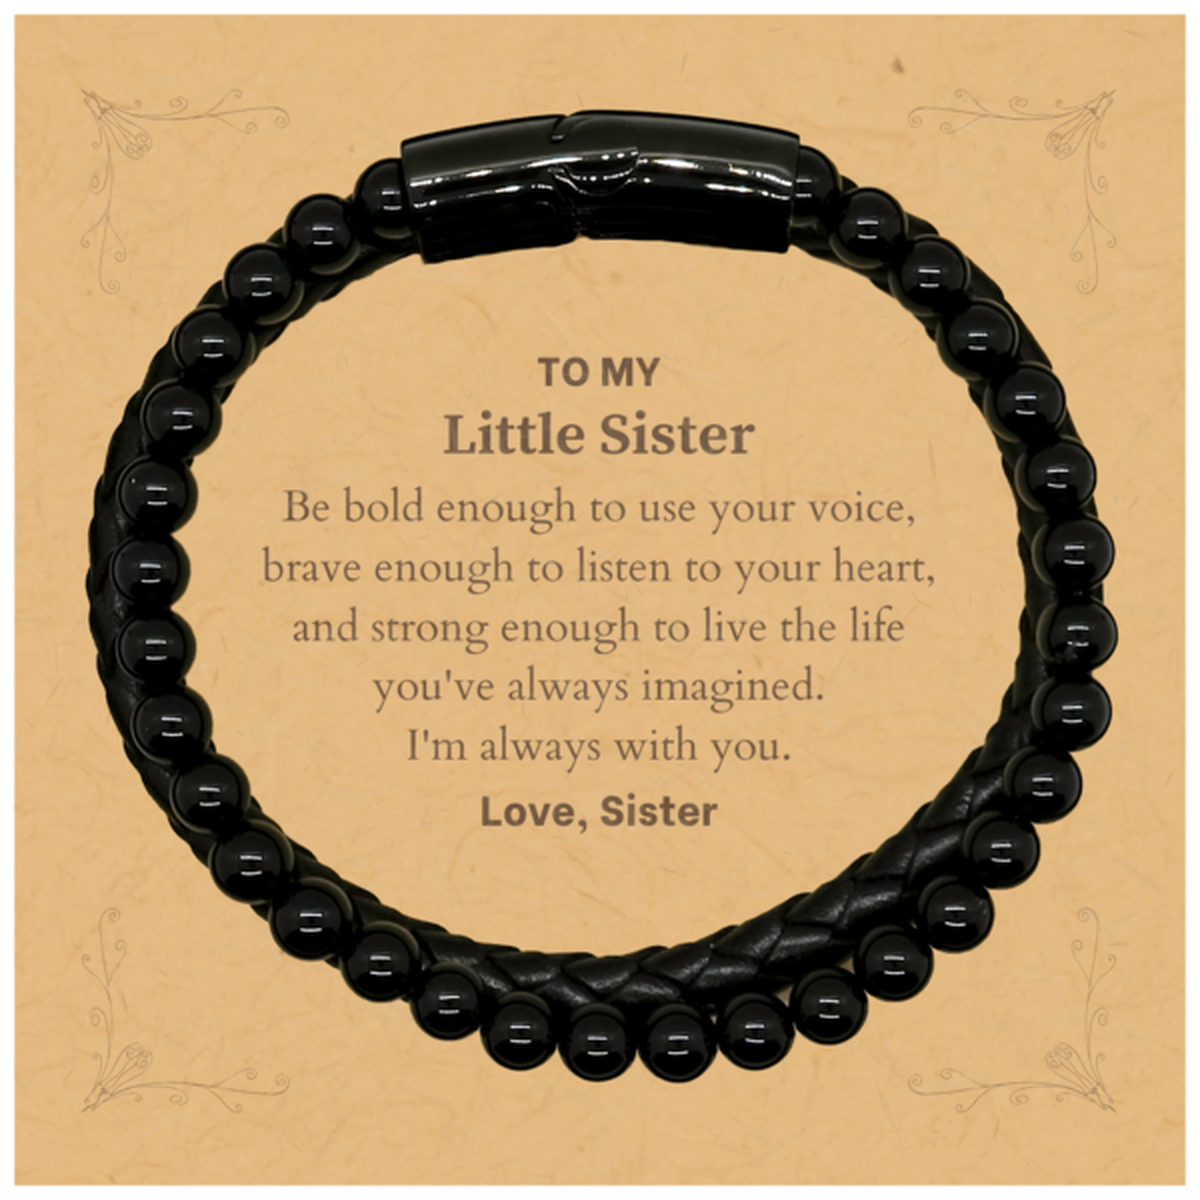 Keepsake Little Sister Stone Leather Bracelets Gift Idea Graduation Christmas Birthday Little Sister from Sister, Little Sister Be bold enough to use your voice, brave enough to listen to your heart. Love, Sister